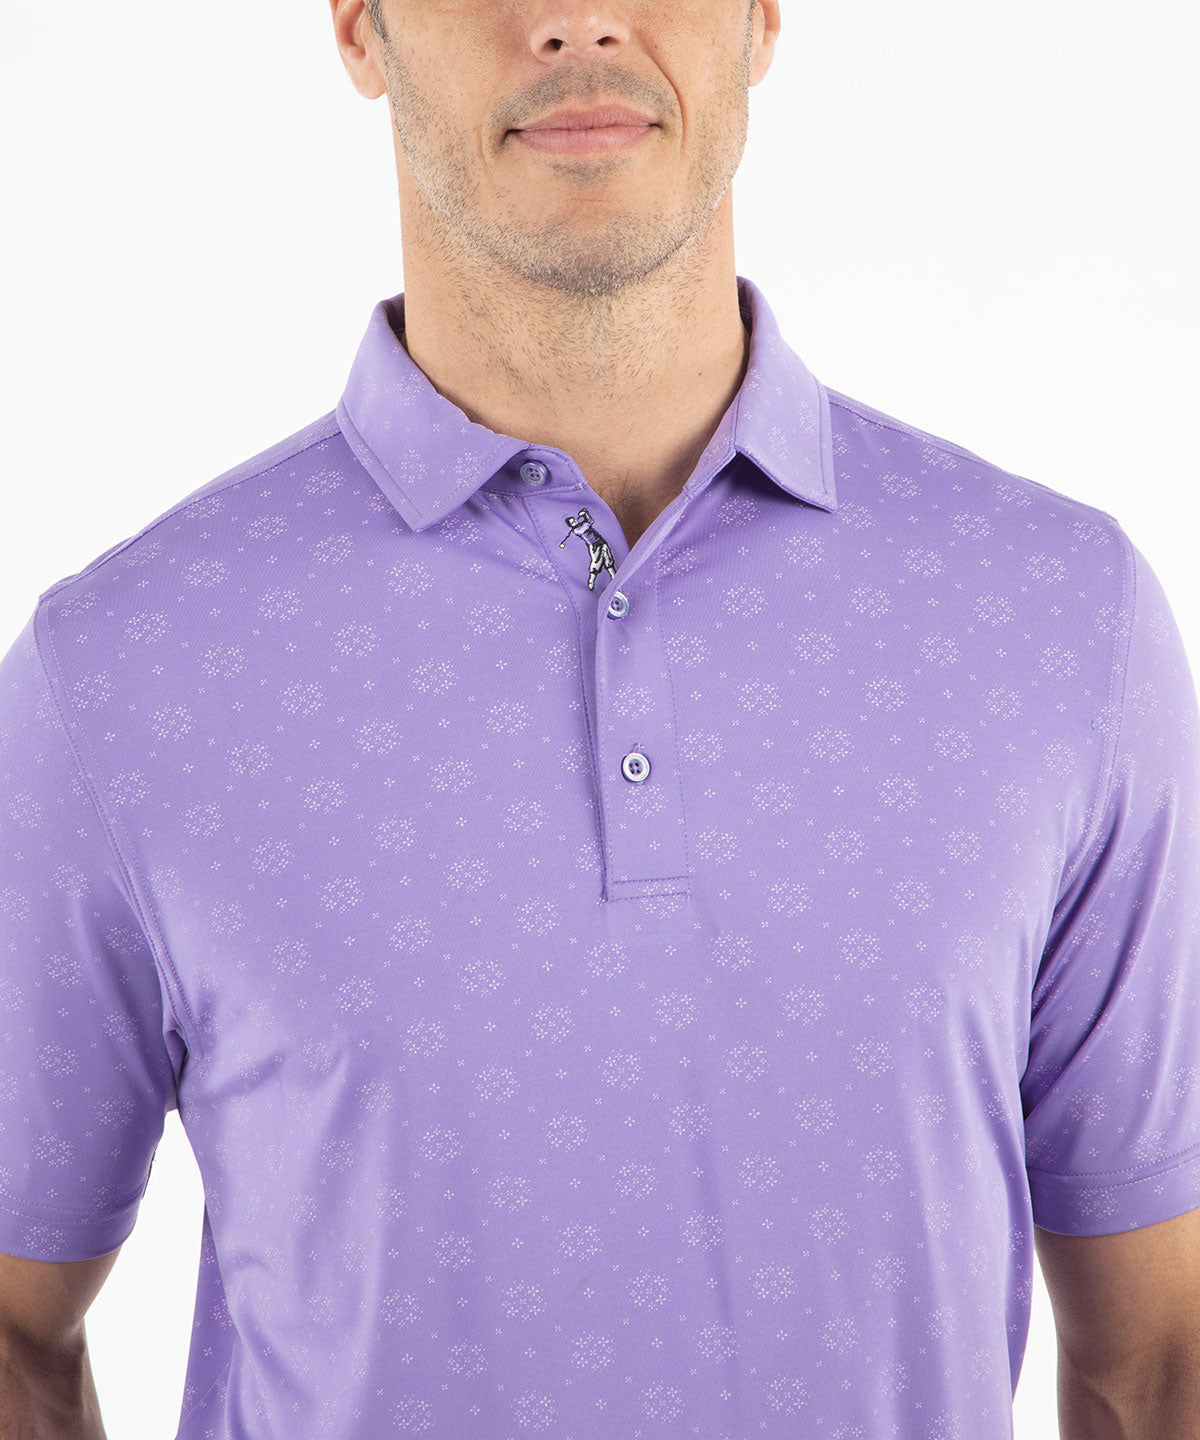 Performance Jersey Floral Print Polo